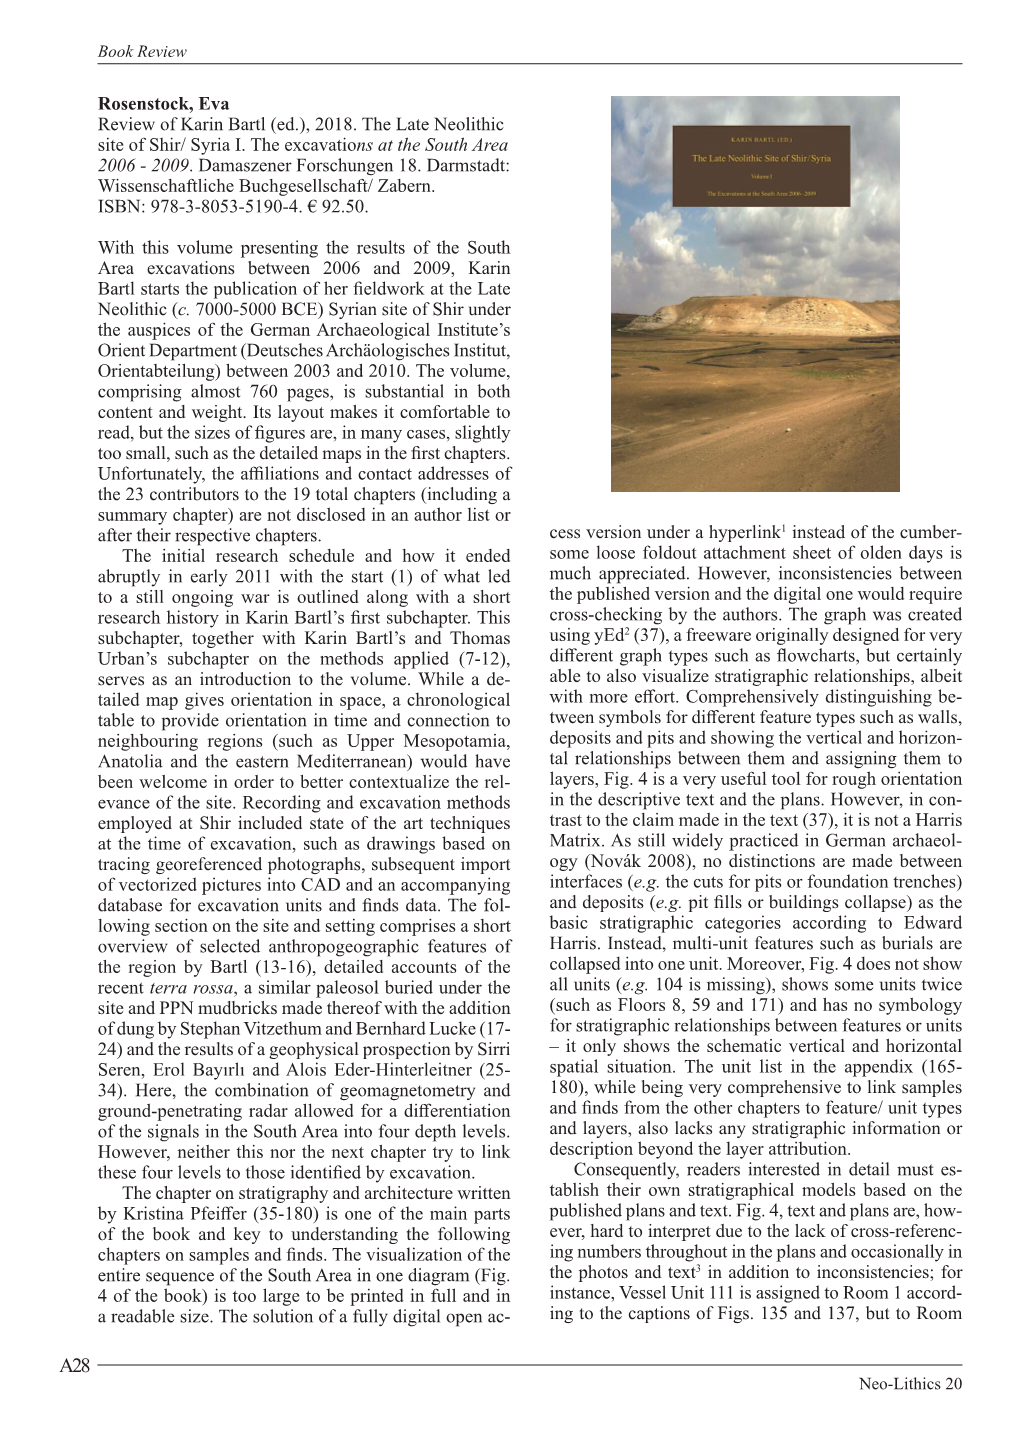 Review of Karin Bartl (Ed.), 2018. the Late Neolithic Site of Shir / Syria I